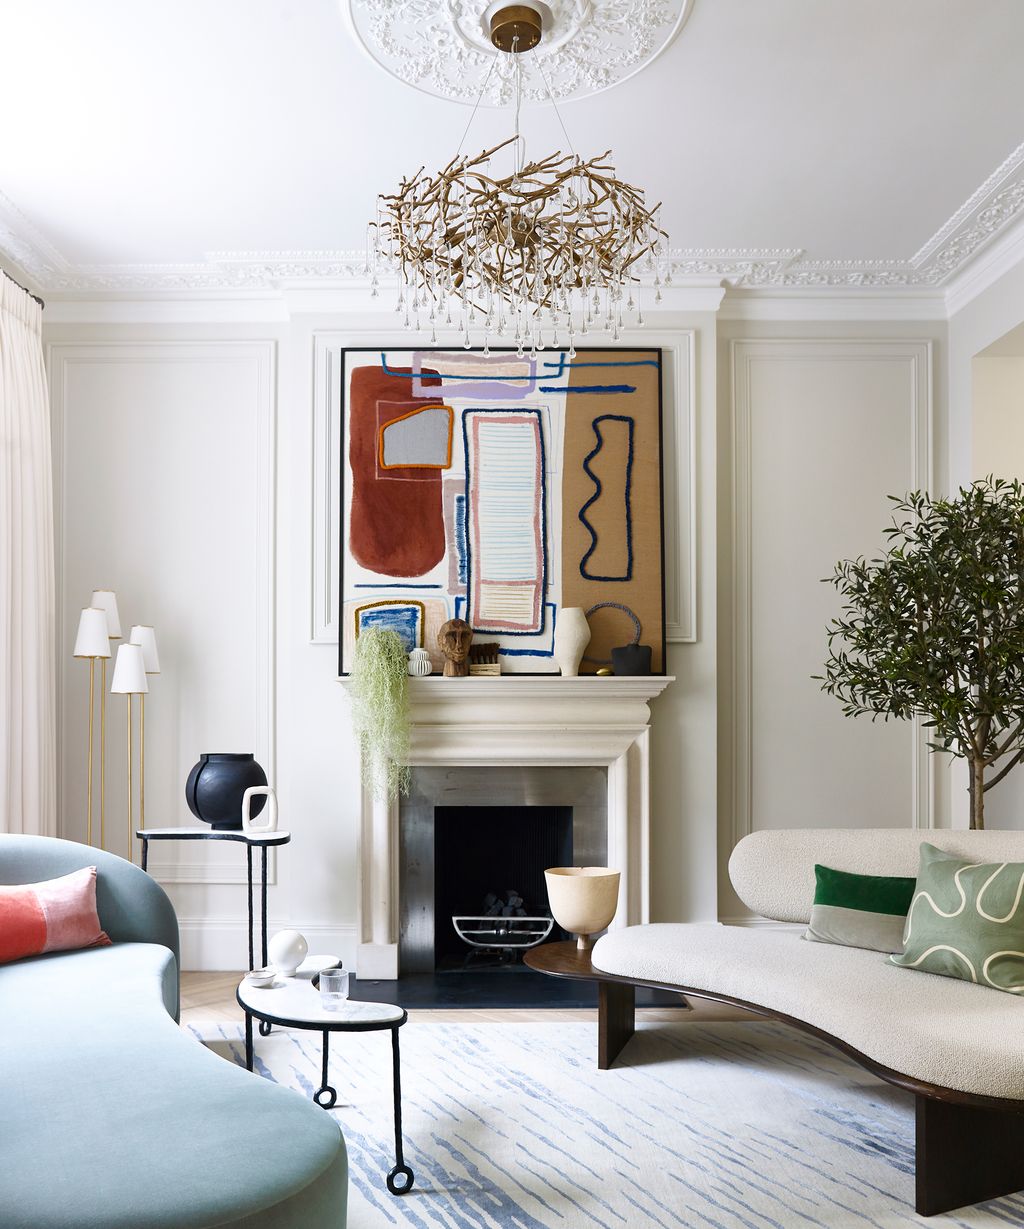 Tour this Gunter and Co designed Chelsea home | Homes & Gardens